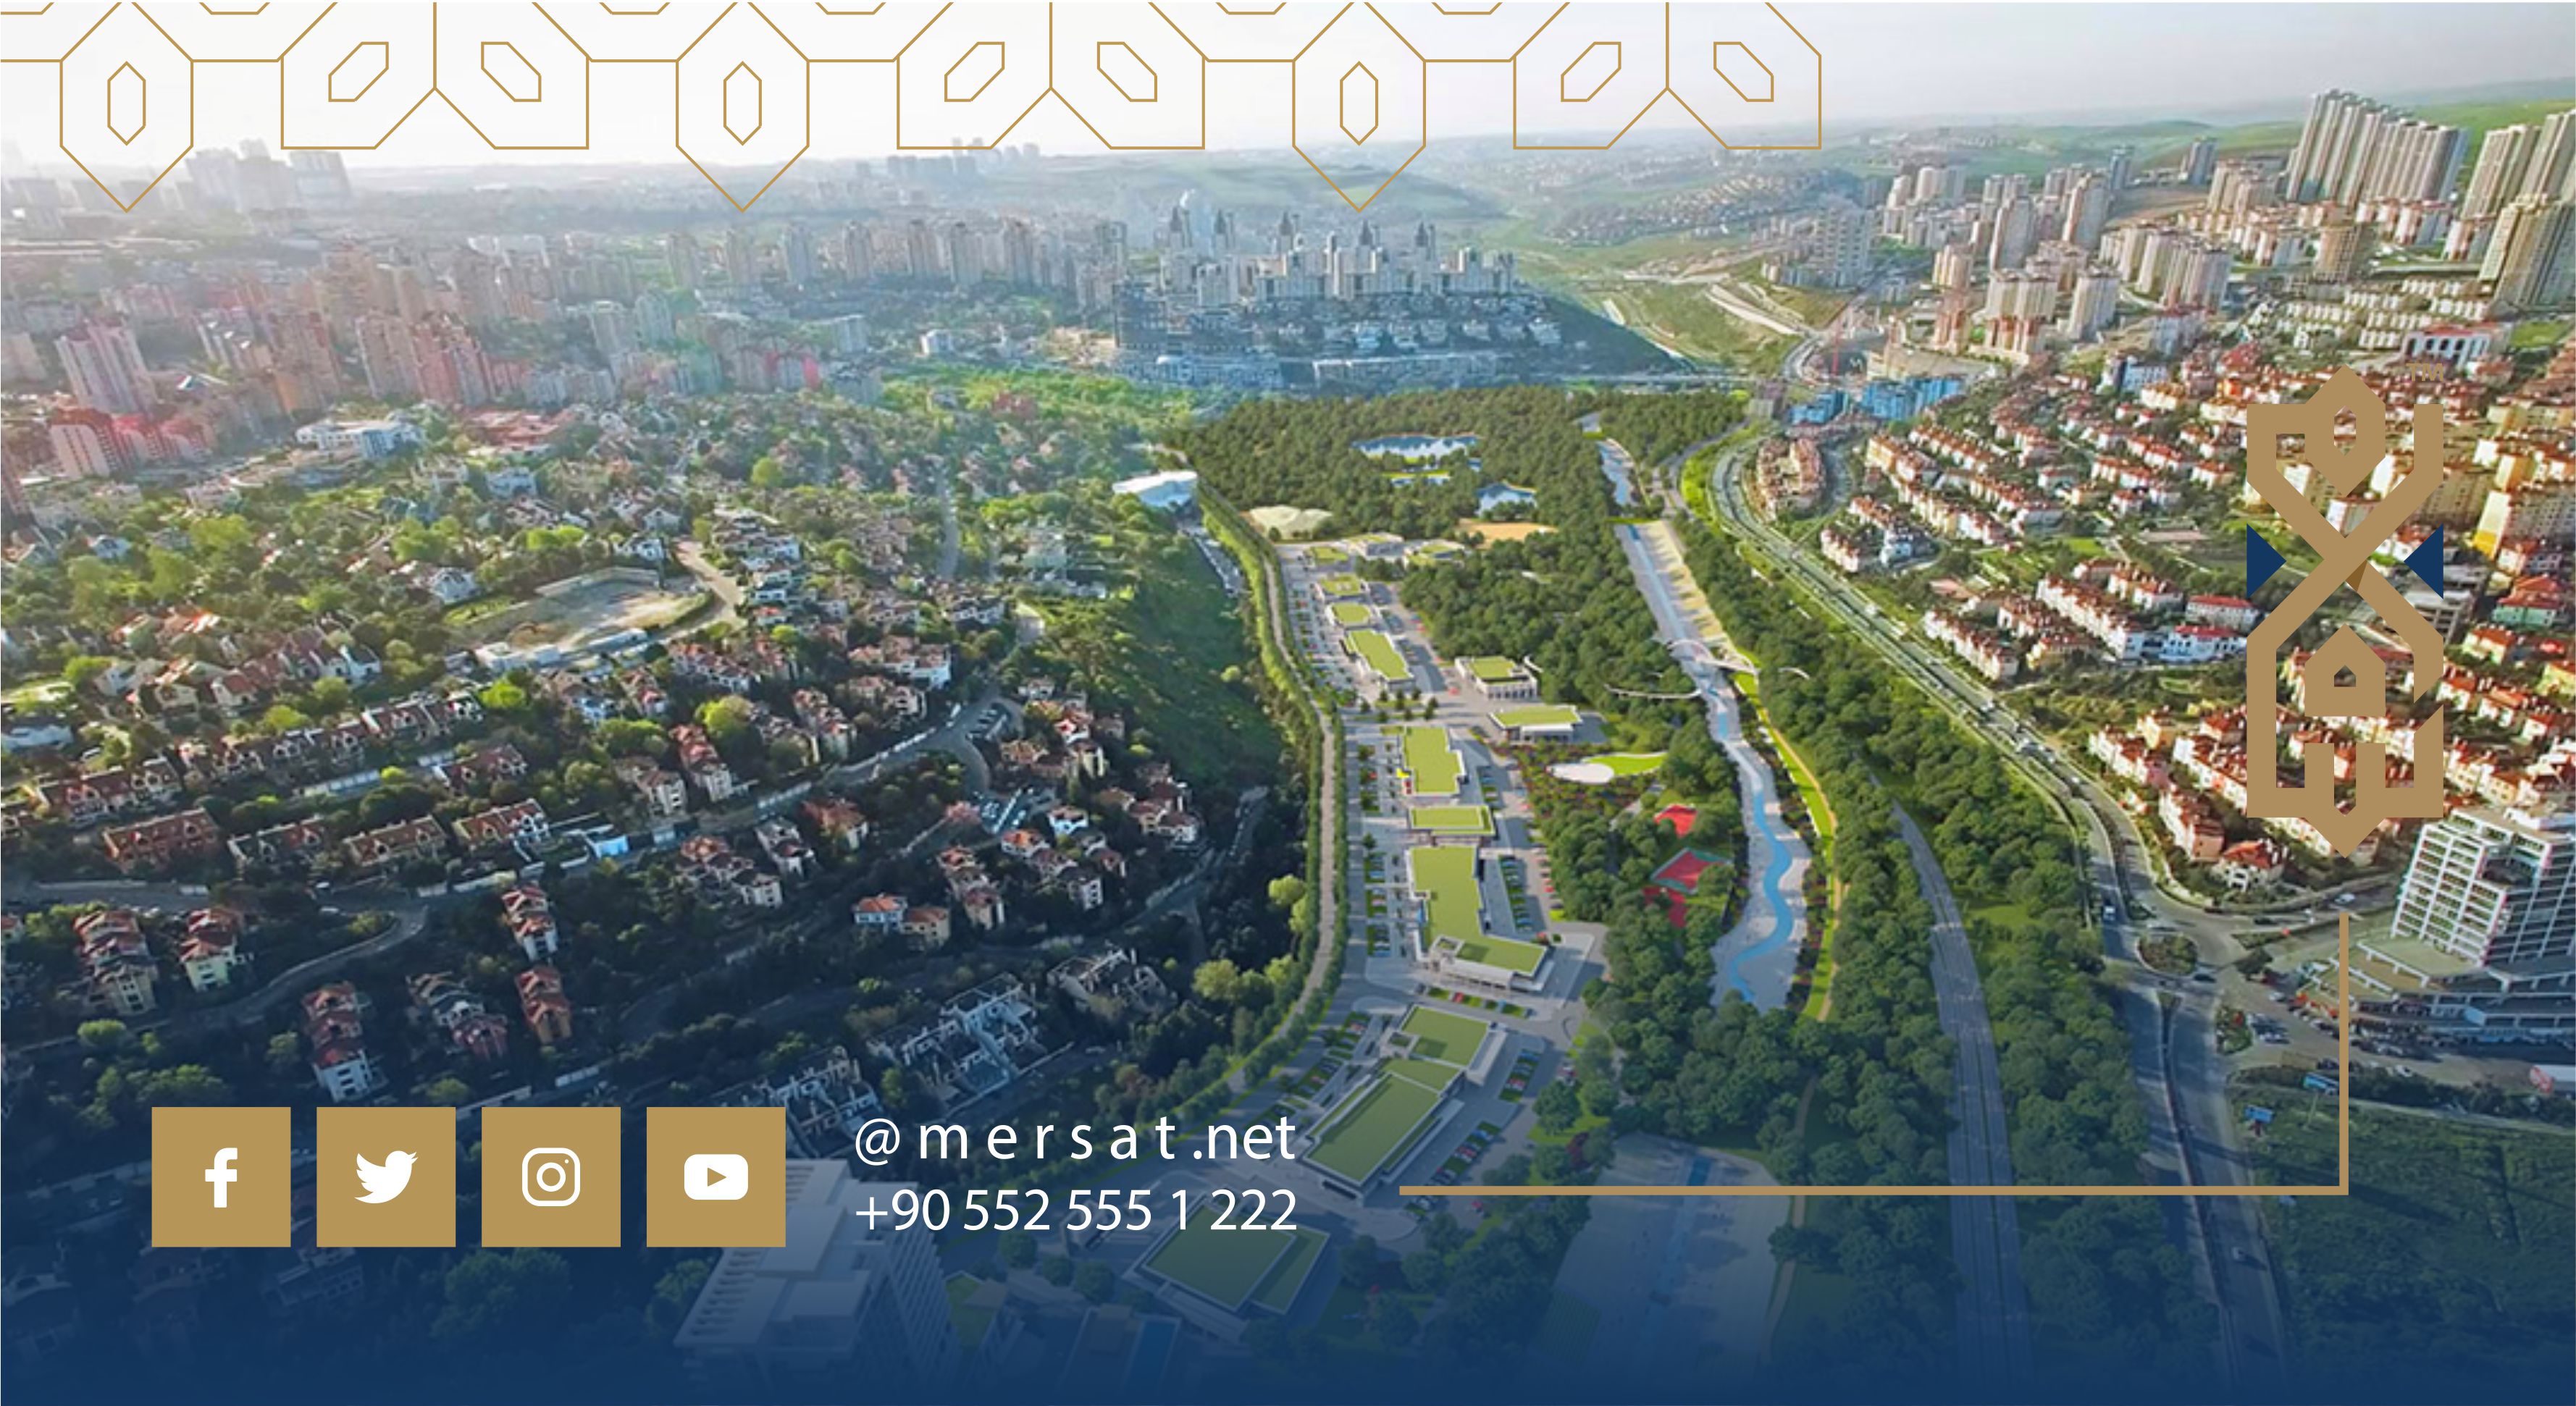 Bahcesehir .. An investment area with the privilege to buy real estate in Istanbul